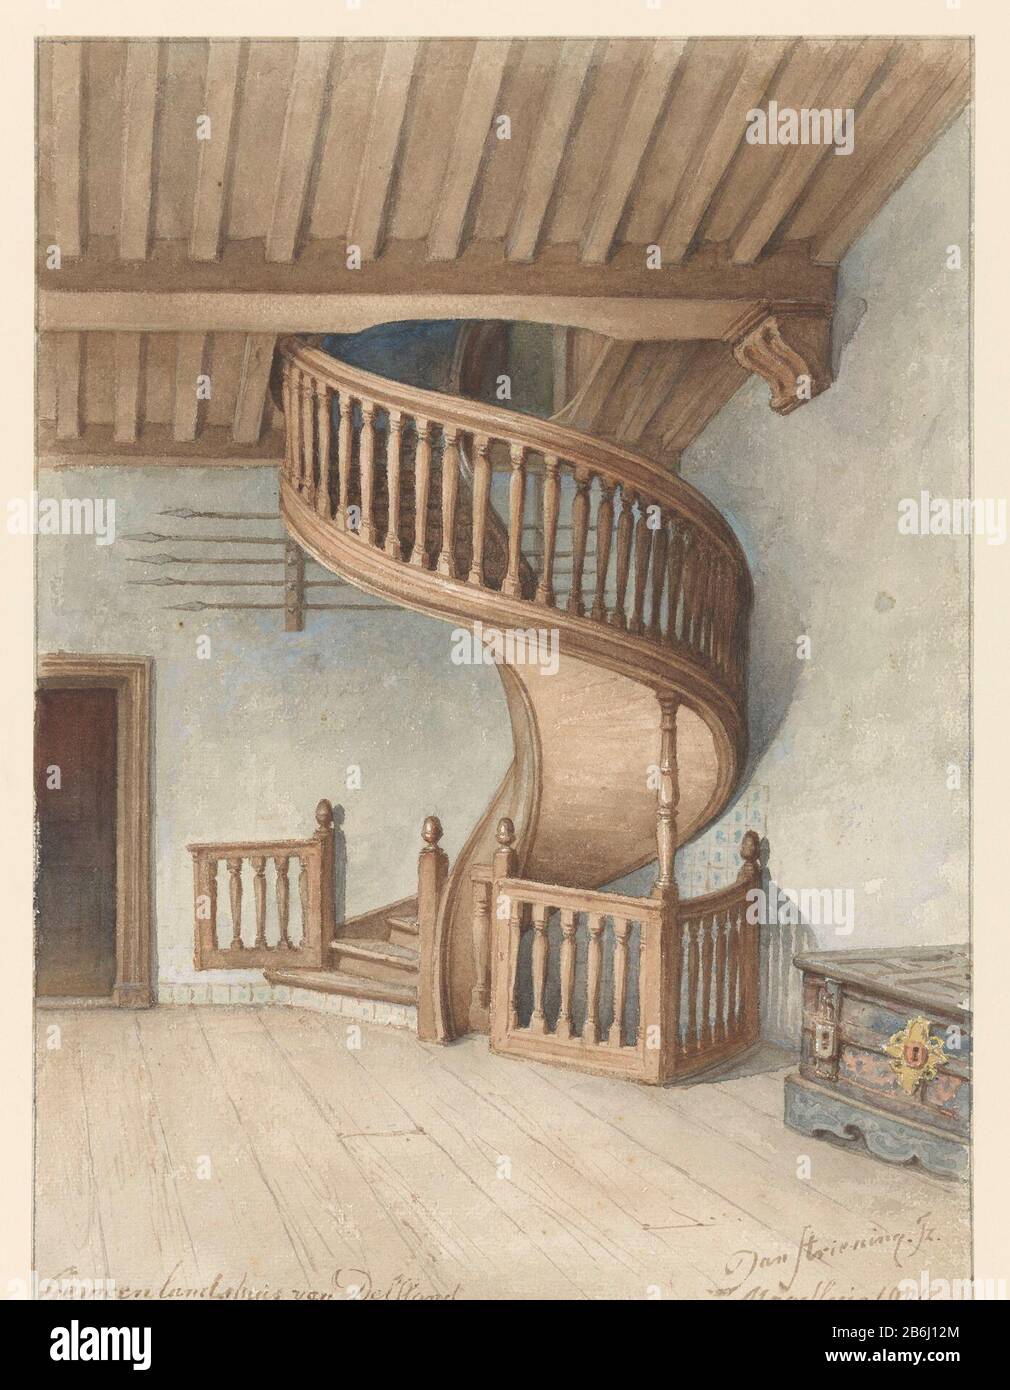 The wooden staircase in the Gemeenlandshuis Delfland, Maassluis The wooden spiral staircase in the Gemeenlandshuis Delfland, Maassluis Property Type: drawing watercolor Item number: RP-T 1968-34 Manufacturer : artist: Jan Striening Dating: 1901 Physical features: brush color material: paper watercolor technique: Brush dimensions: h 438 mm × W 318 mm Subject: staircasenames of cities and villages (MAASSLUIS) names of historical buildings, sites, streets, etc. (COMMON COUNTRY HOUSE DELFLAND) Where: Maassluis Stock Photo